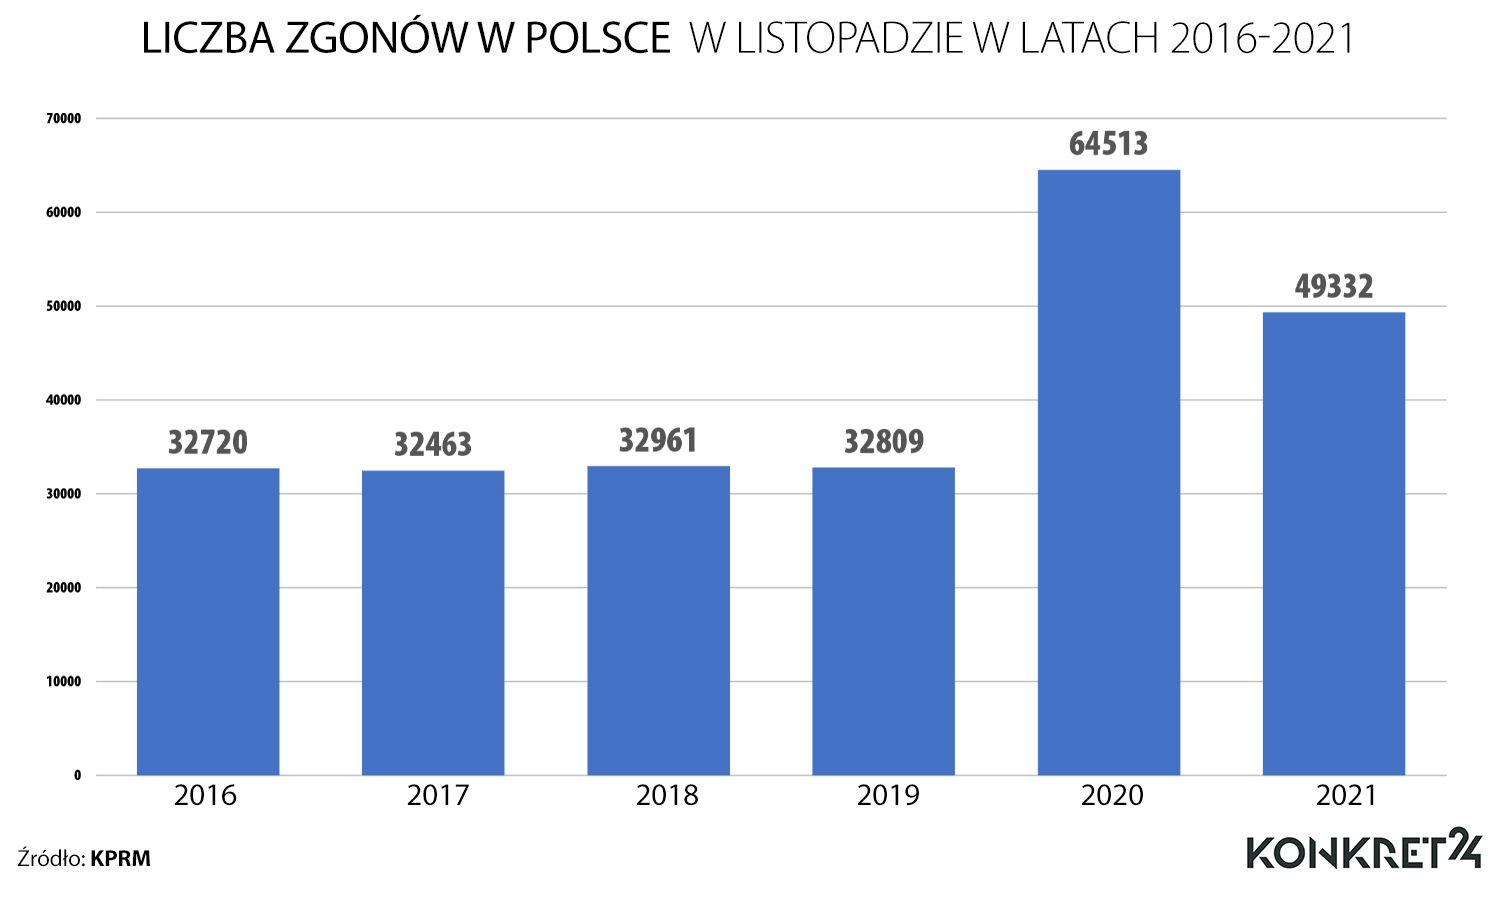 Number of deaths in Poland in 2016-2021